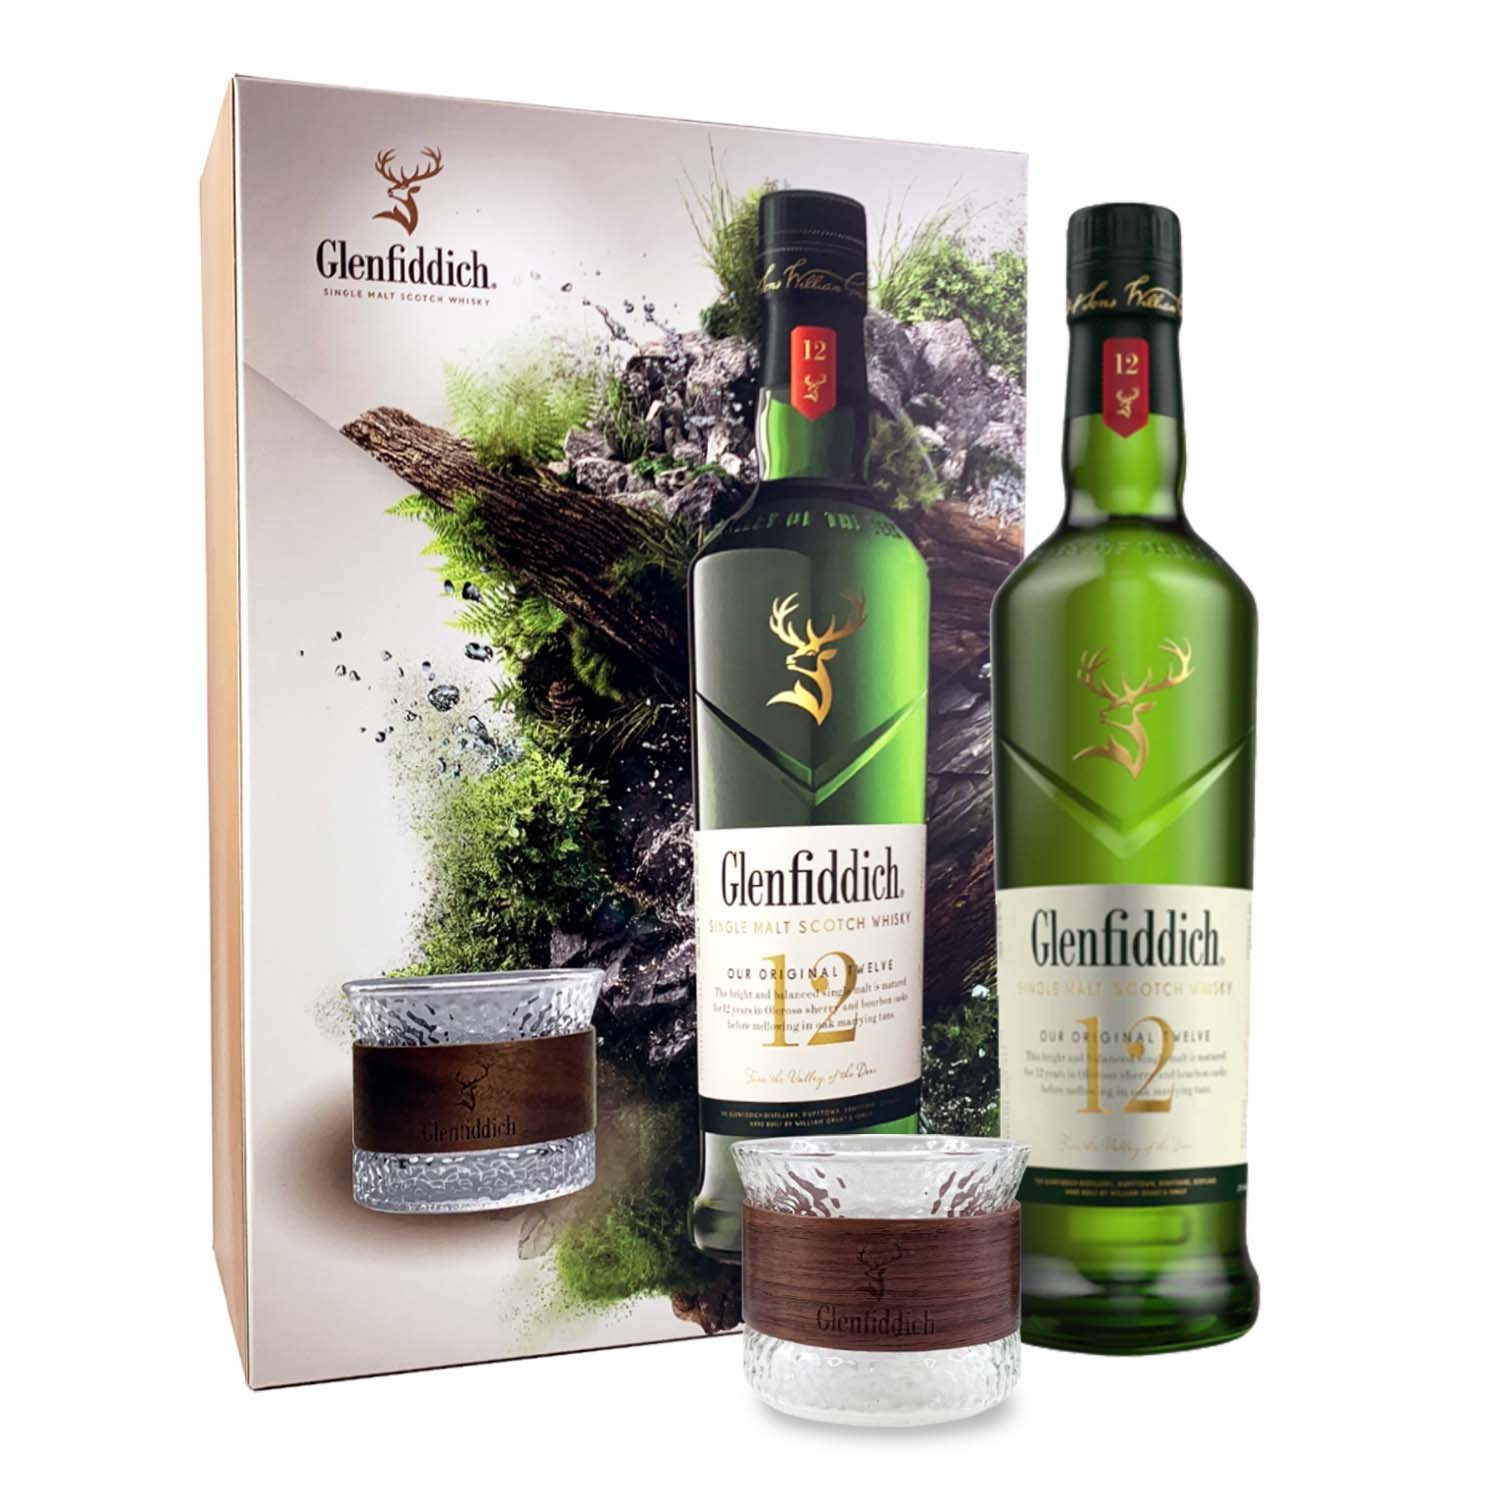 Glenfiddich 12 Years Old Single Malt Scotch Whisky Gift Box With Wooden Handle Glass 700ml